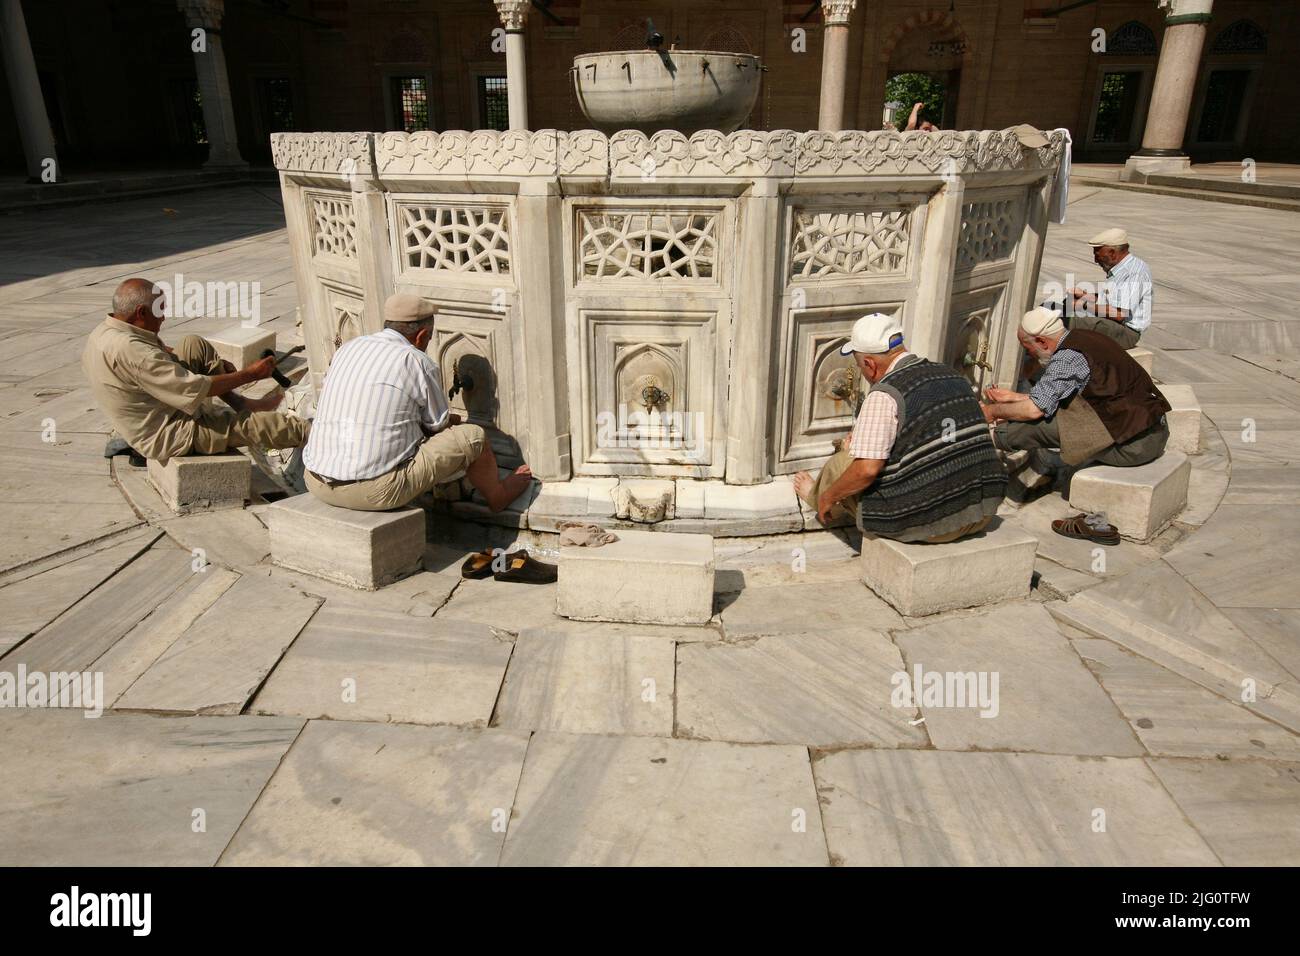 Kırkpınar (Turkish Oil Wrestling). Muslim men washing their feet before entering the mosque in the marble fountain in the courtyard of the Selimiye Mosque (Selimiye Camii) in Edirne, Turkey. The congregational prayer in the Selimiye Mosque marks the beginning of the 648th annual Kırkpınar Tournament on 2 July 2009. The annual tournament in Turkish oil wrestling traditionally starts with the Friday prayer (Jumu'ah) in the Selimiye Mosque designed by Ottoman imperial architect Mimar Sinan and built between 1568 and 1575. Ritual purification called wudu requiring Muslim people to wash their faces Stock Photo